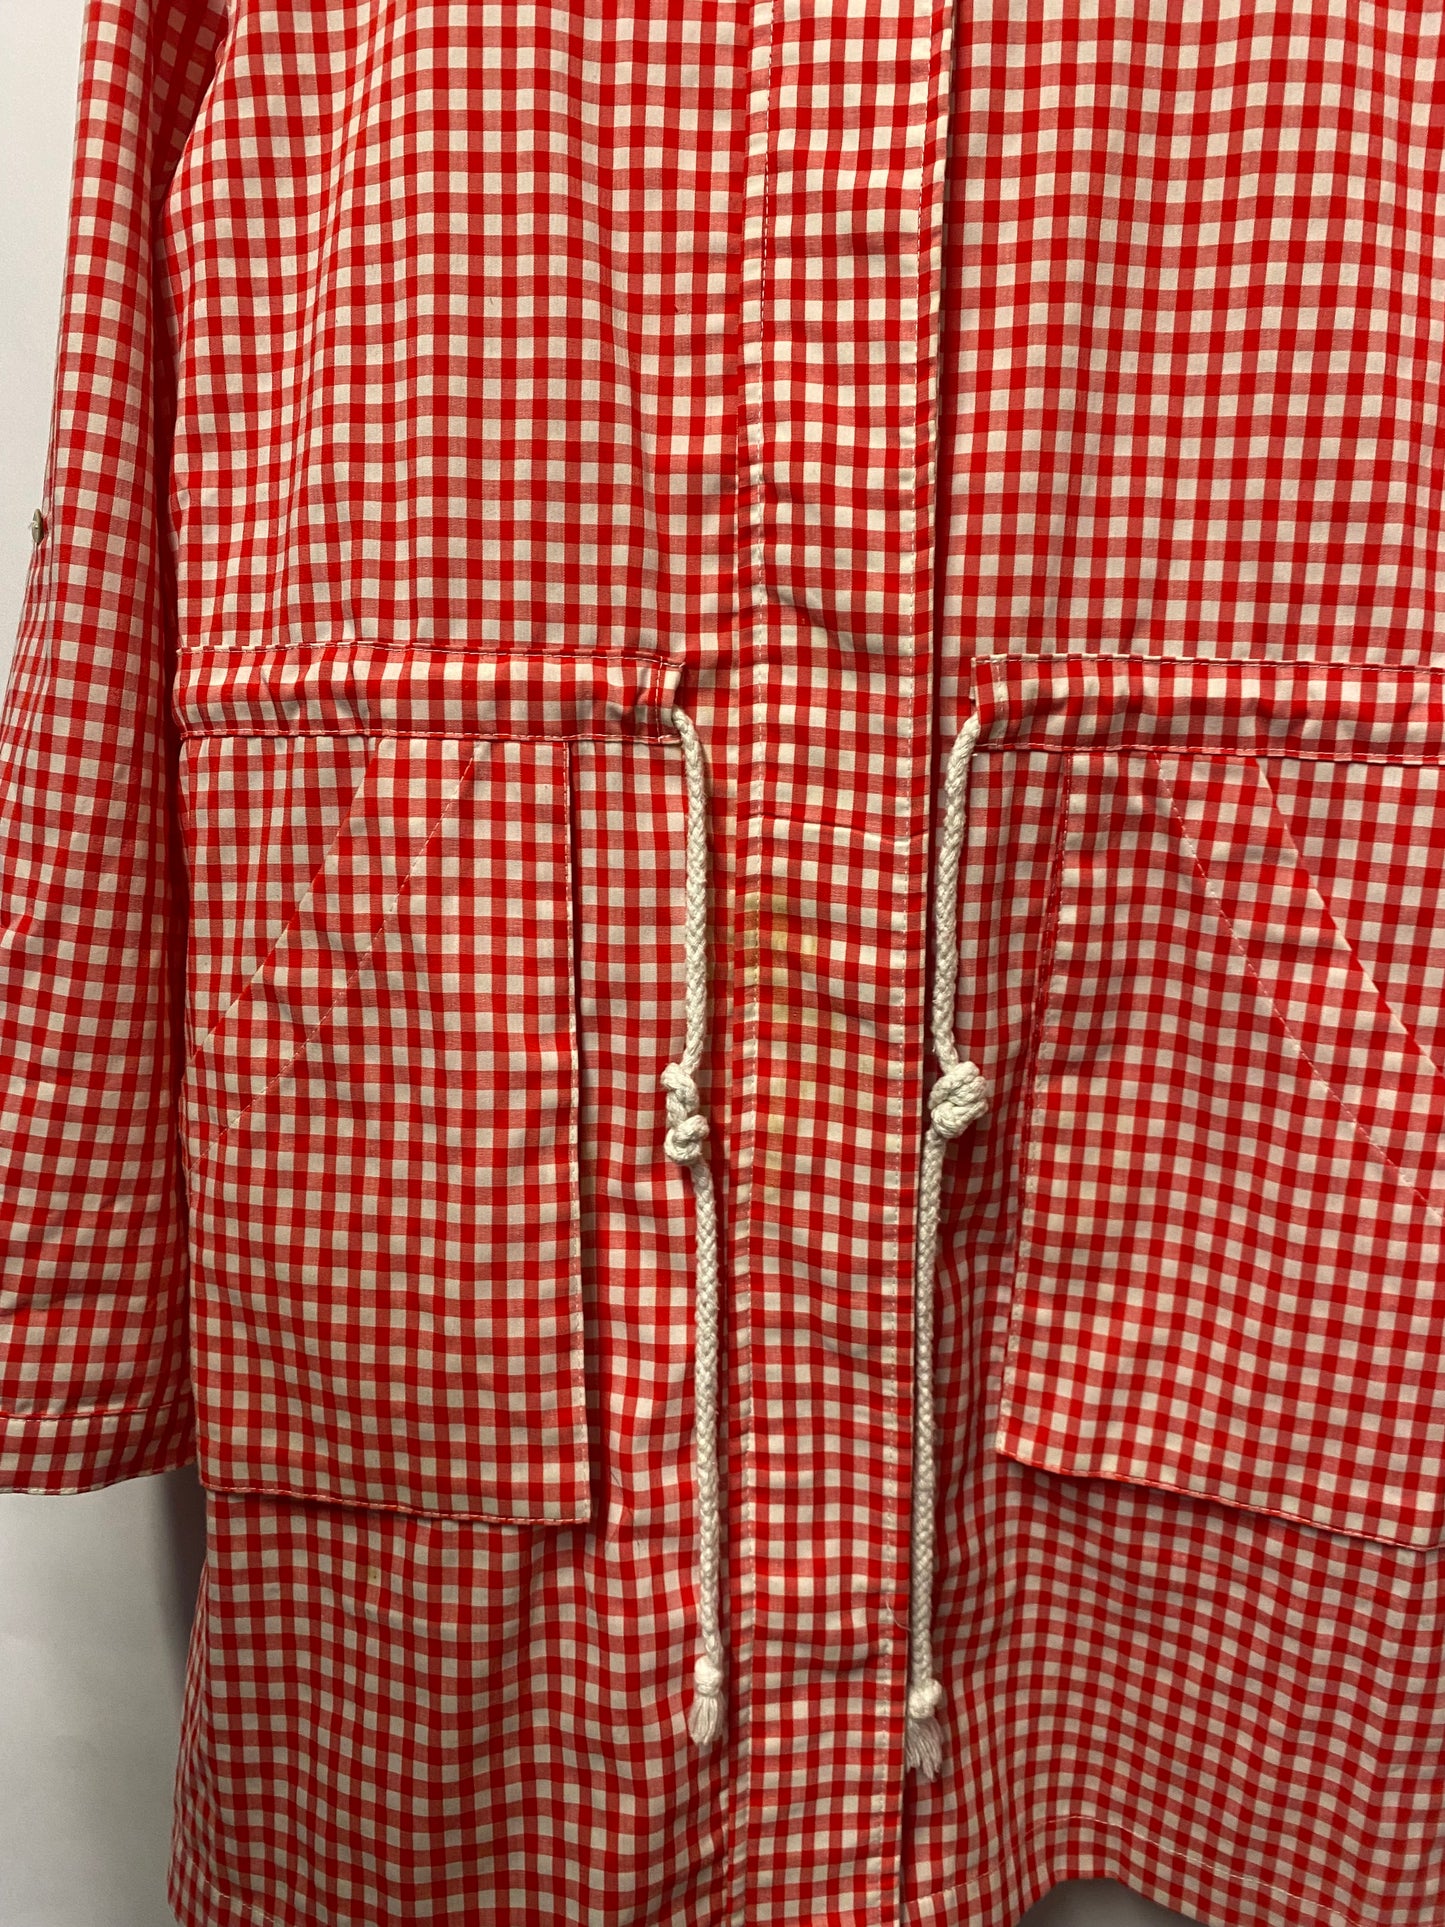 Culle Red and White Gingham Lightweight Cotton Parka Medium